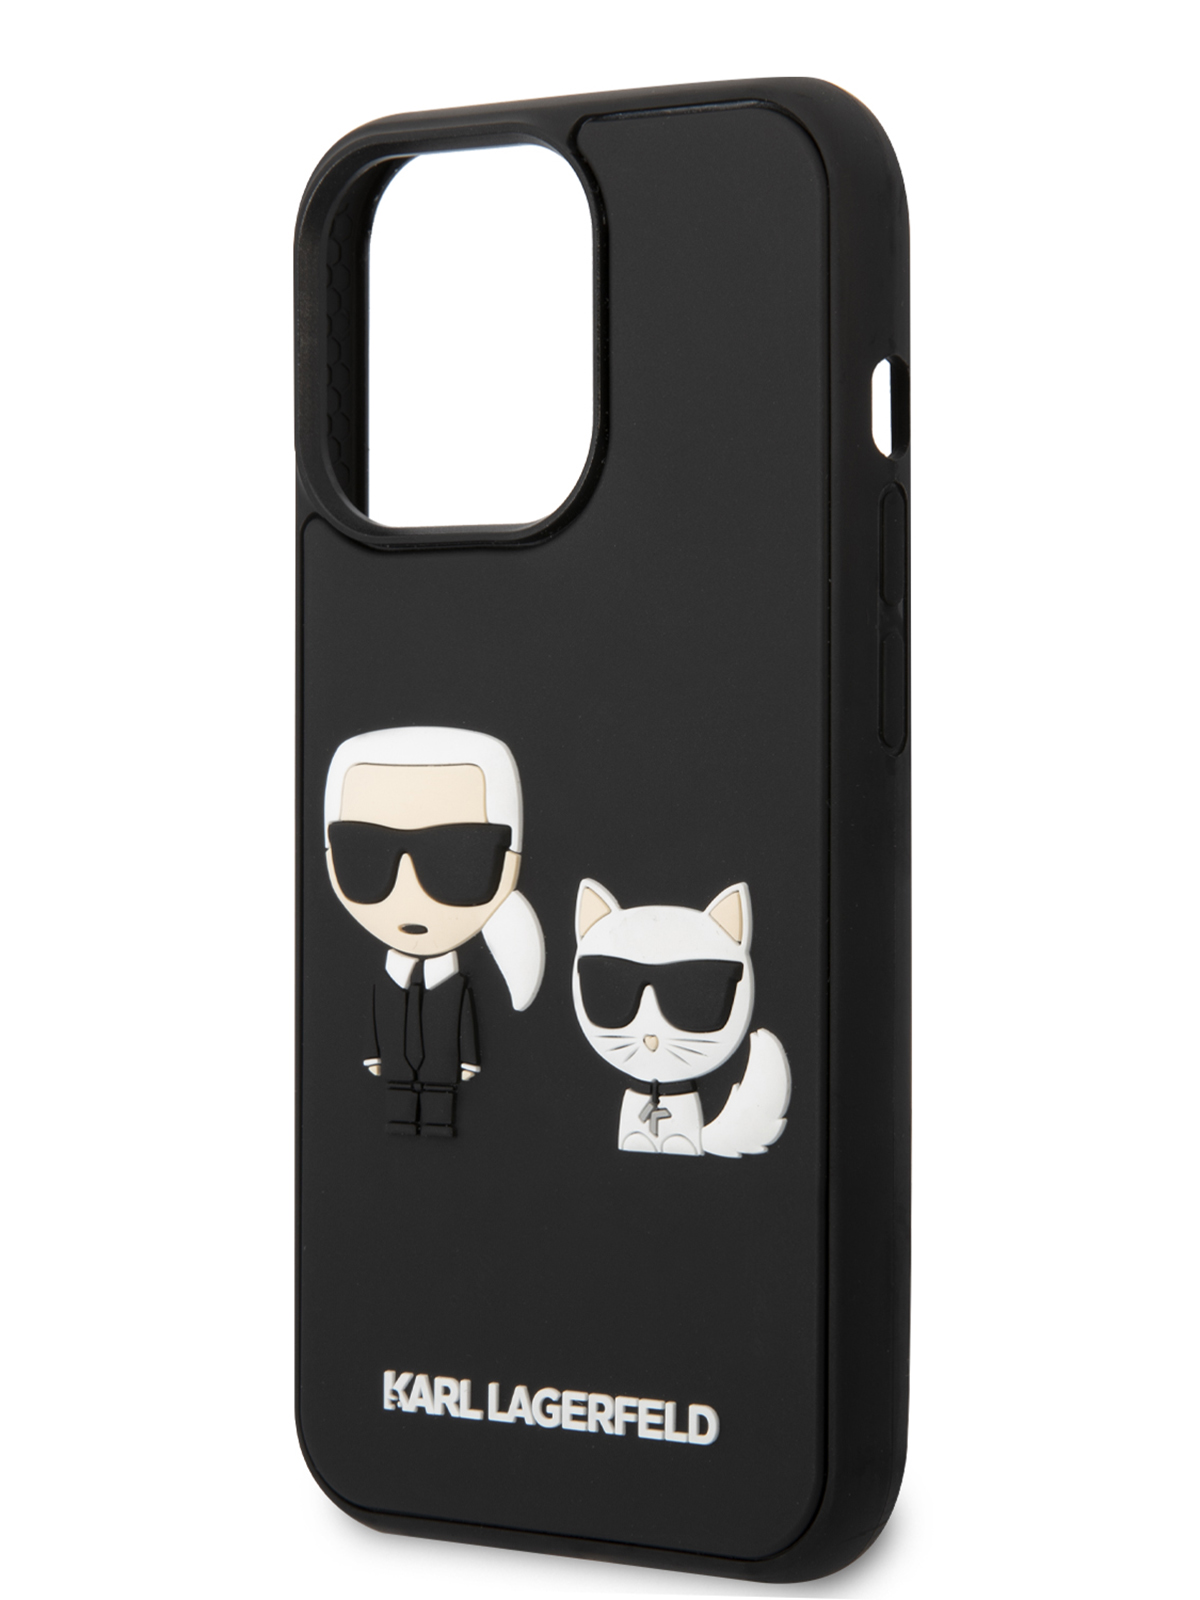 Black 3D-printed iPhone 13 Pro Max case by Karl Lagerfeld